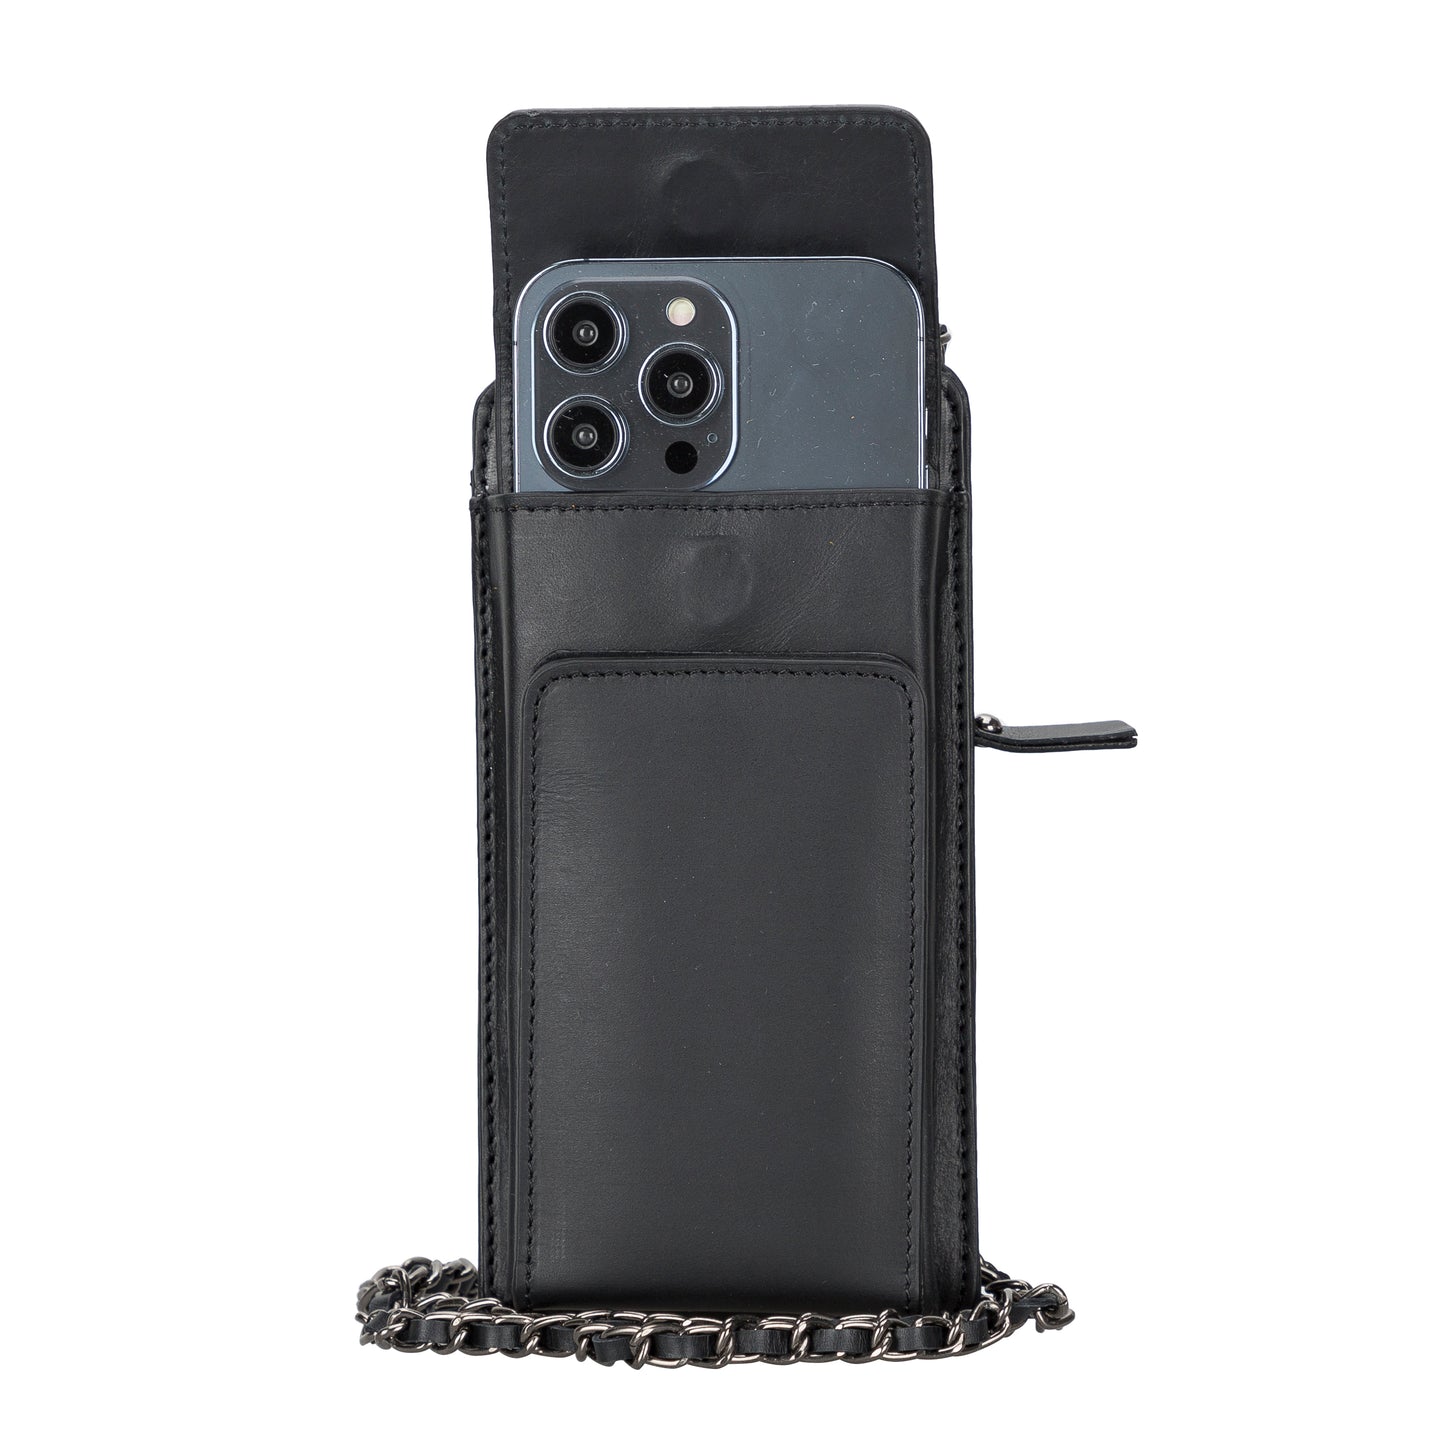 Awjin Leather Phone Bag Up to 6.7" - Rustic Black